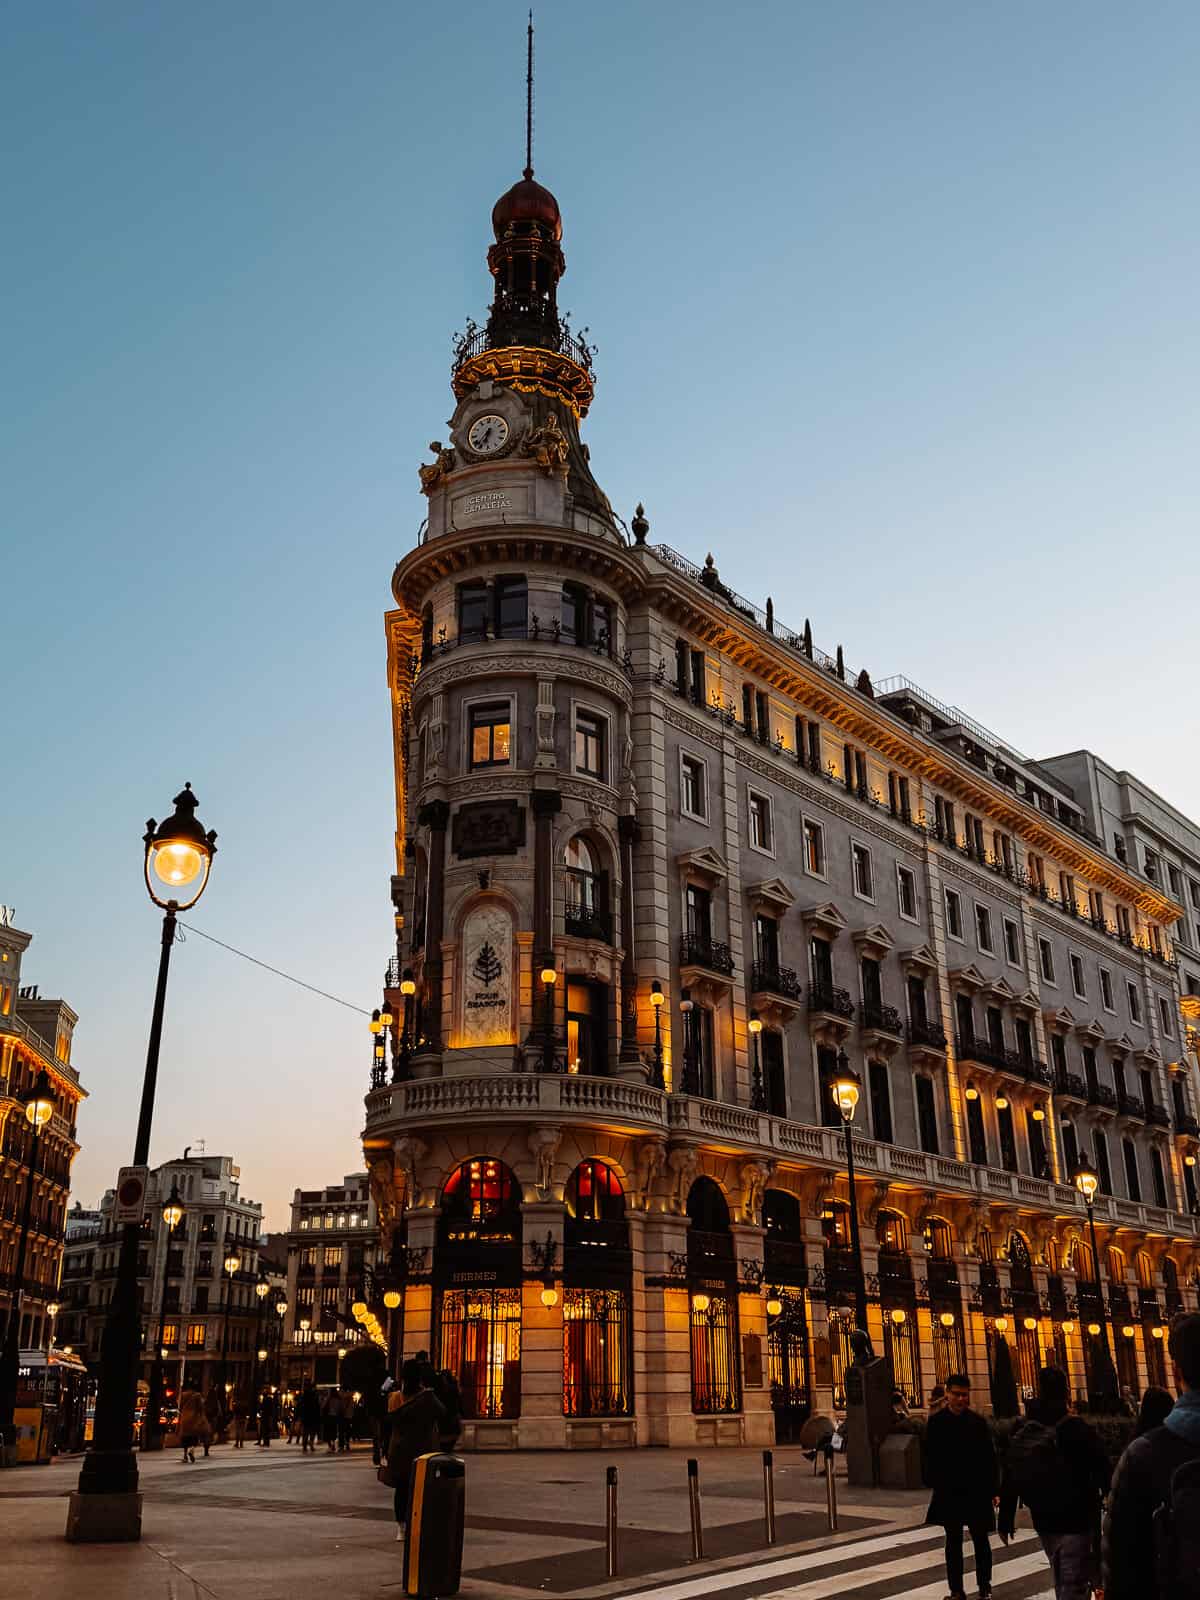 The grandeur of Madrid's architecture is showcased in this image featuring a magnificent building with an elaborate clock tower, illuminated at twilight.